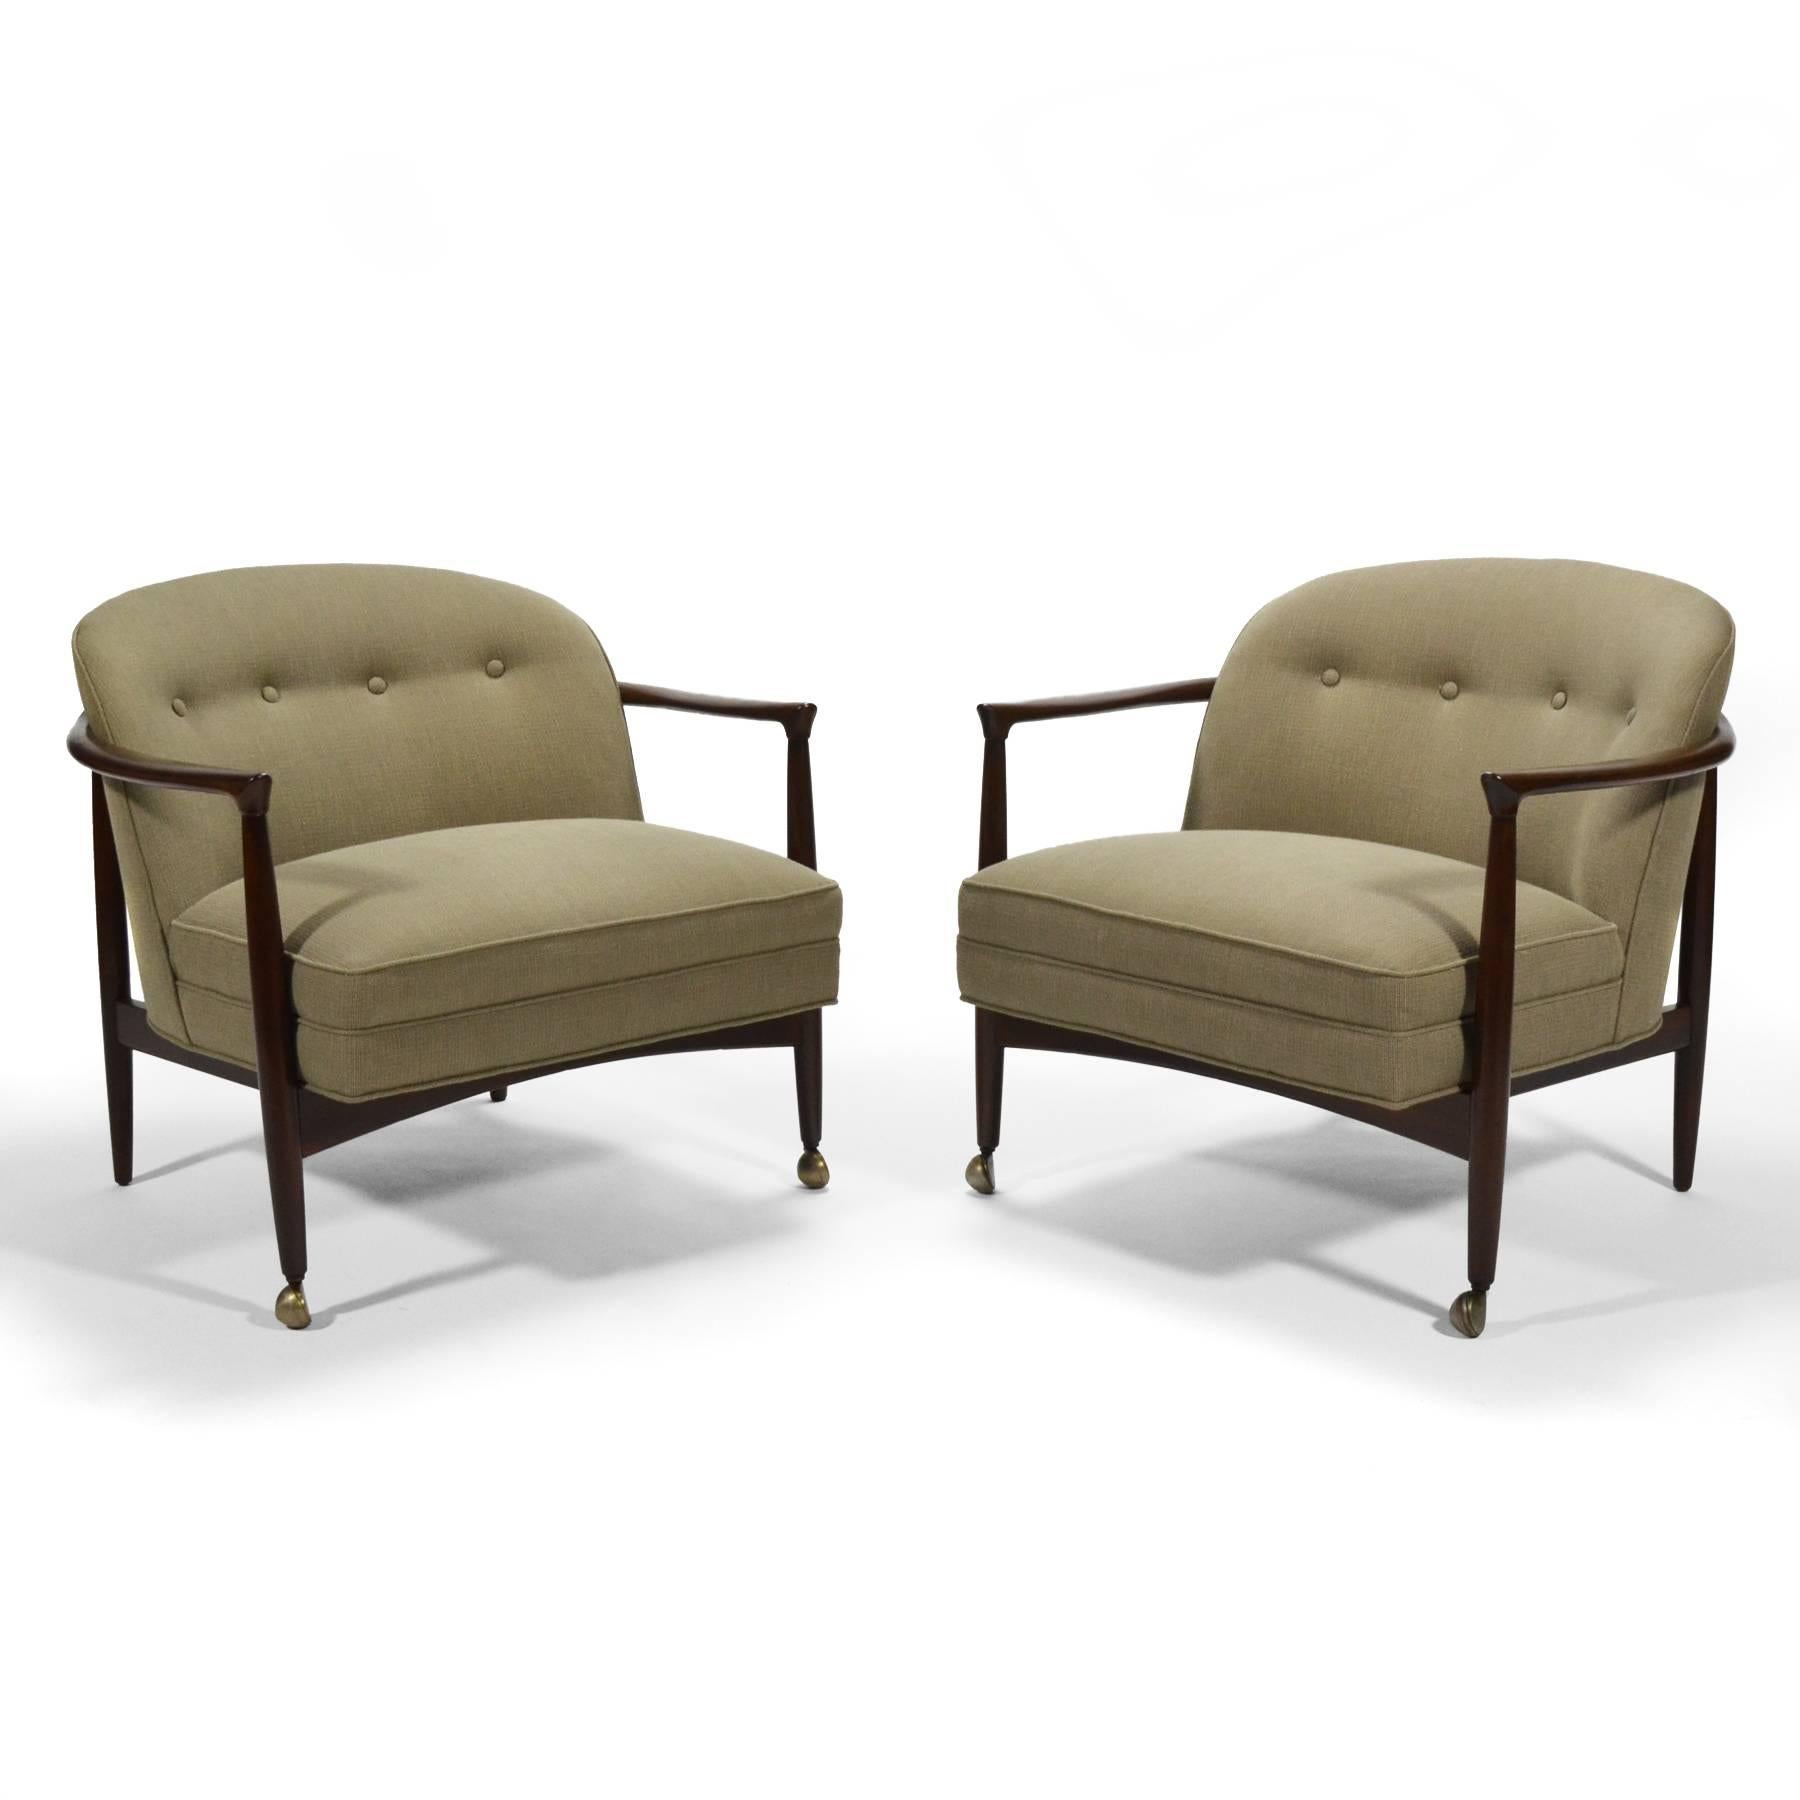 This design by Finn Andersen for Selig features refined details and an exposed wood frame with lovely sculptural details supporting an upholstered seat. It references barrel-back club chairs and has casters under the front legs which is a detail